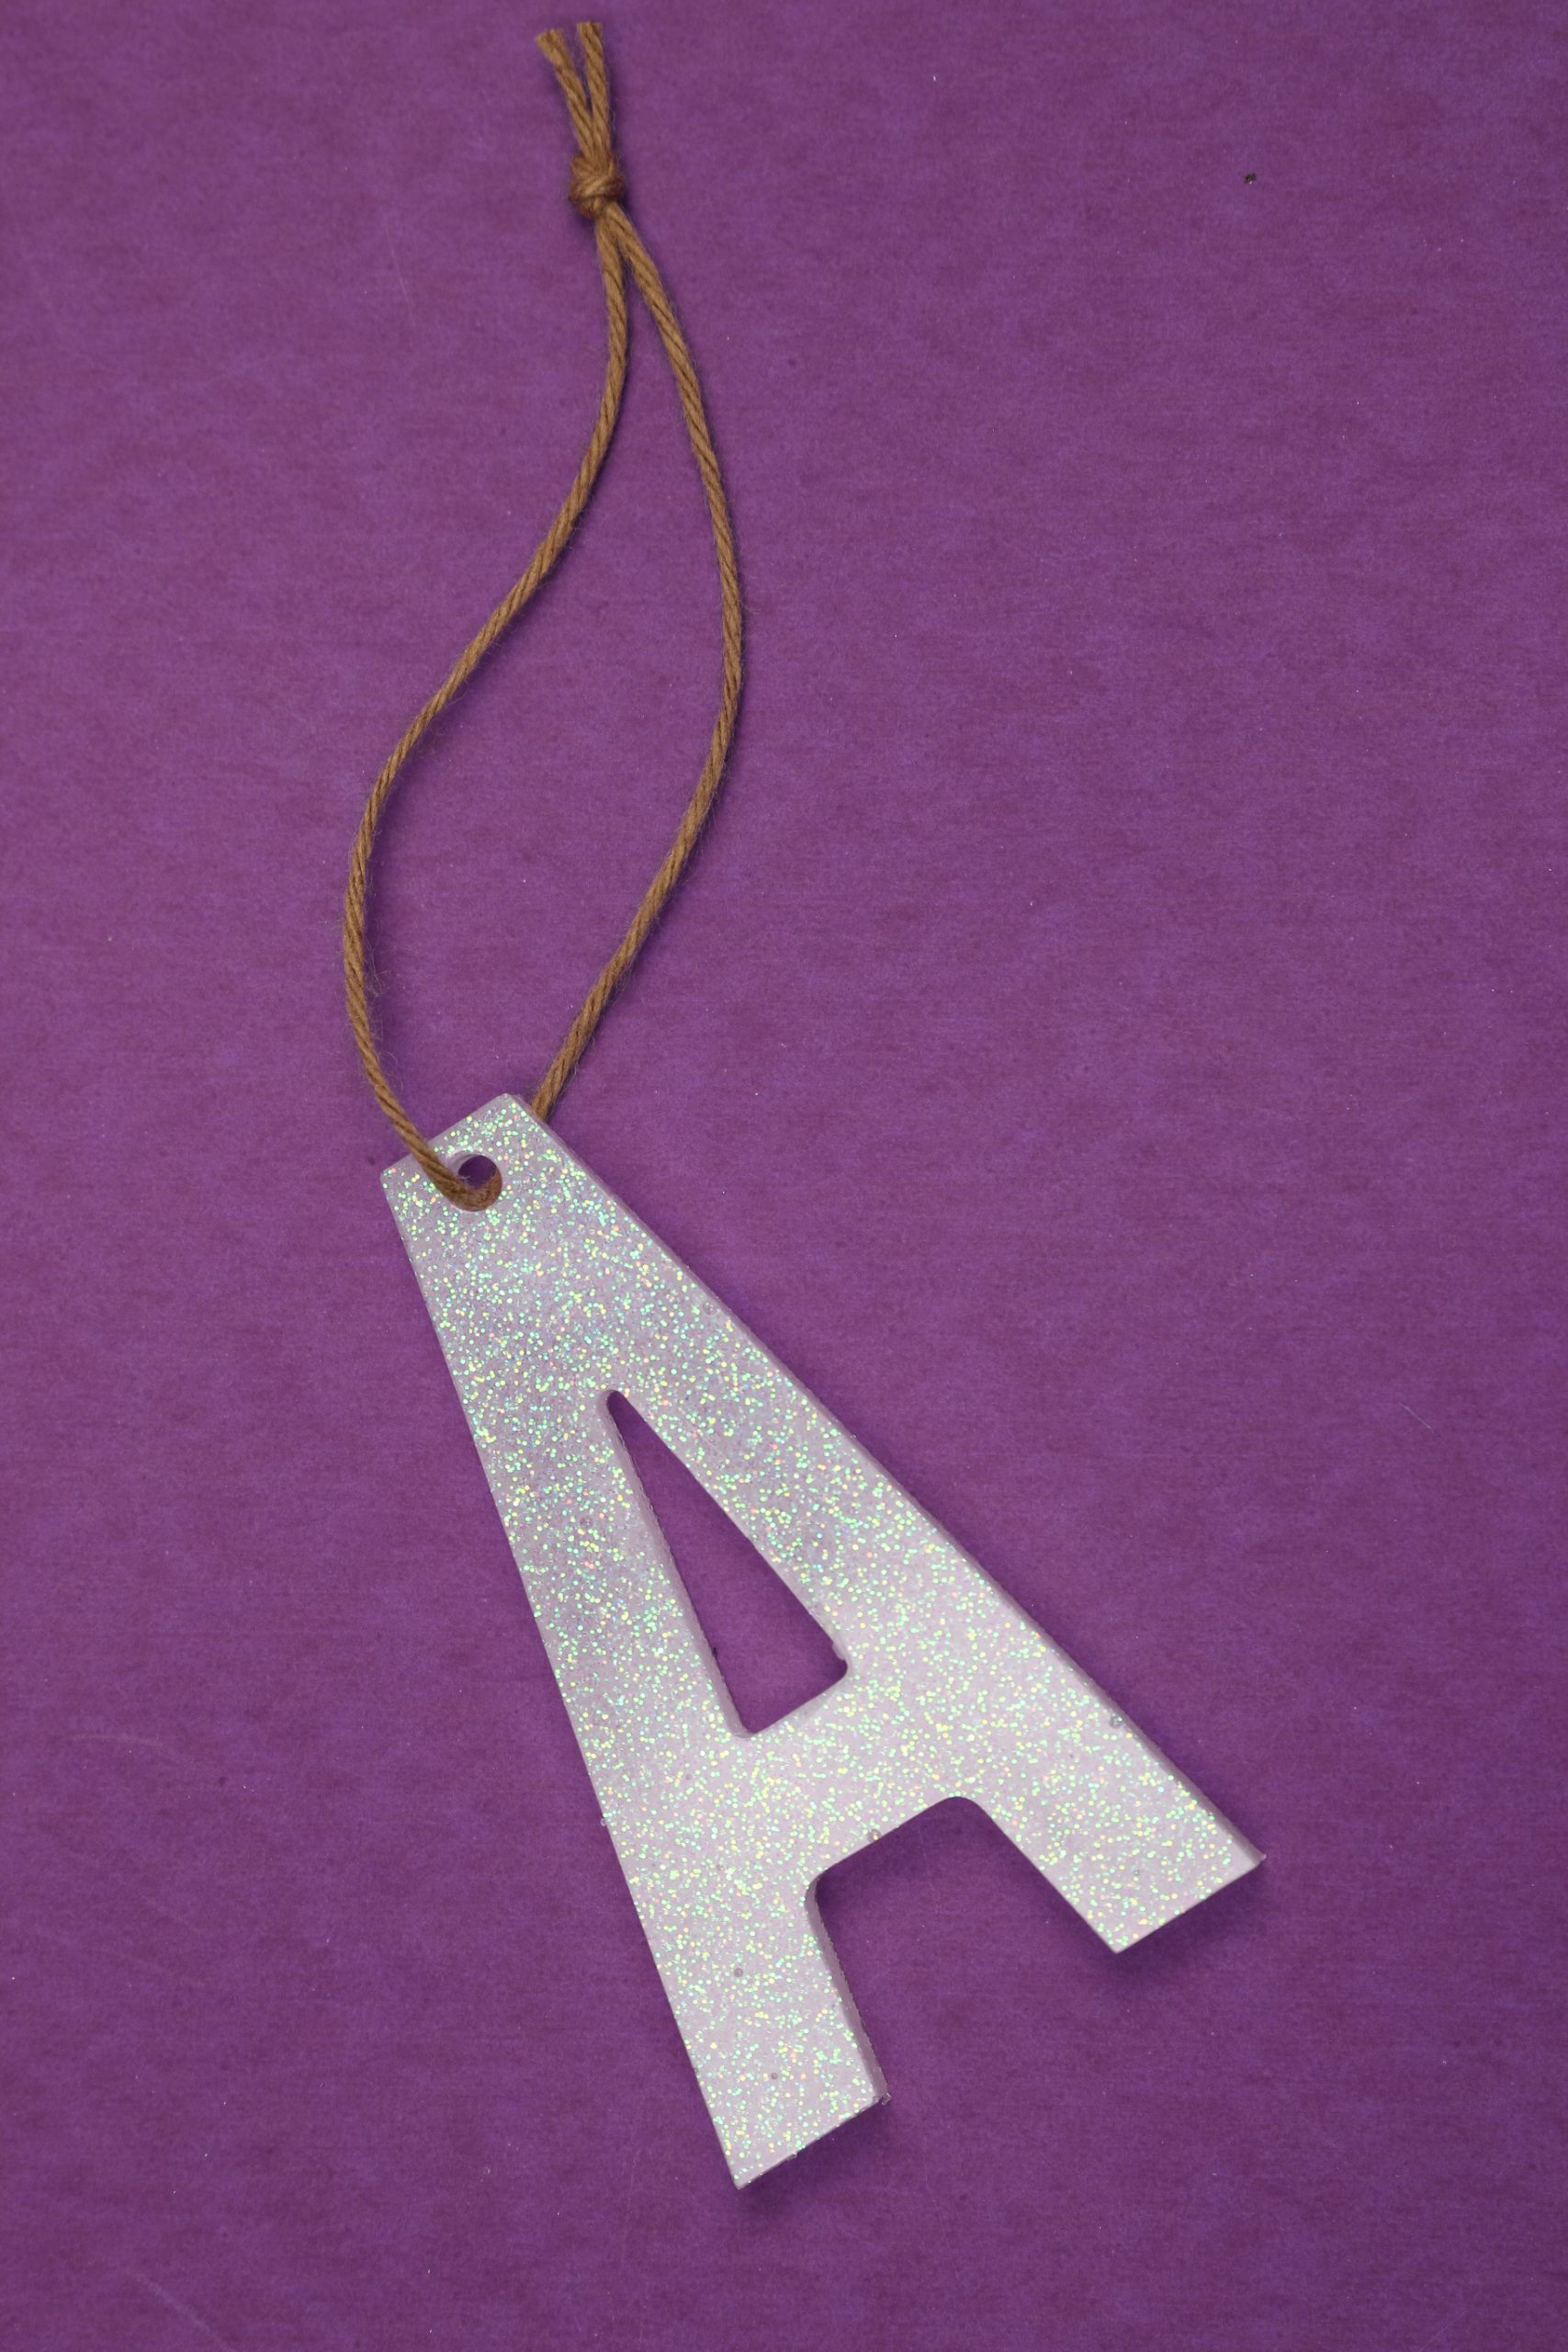 holding an A stocking marker made from resin with a length of twine as a hanger